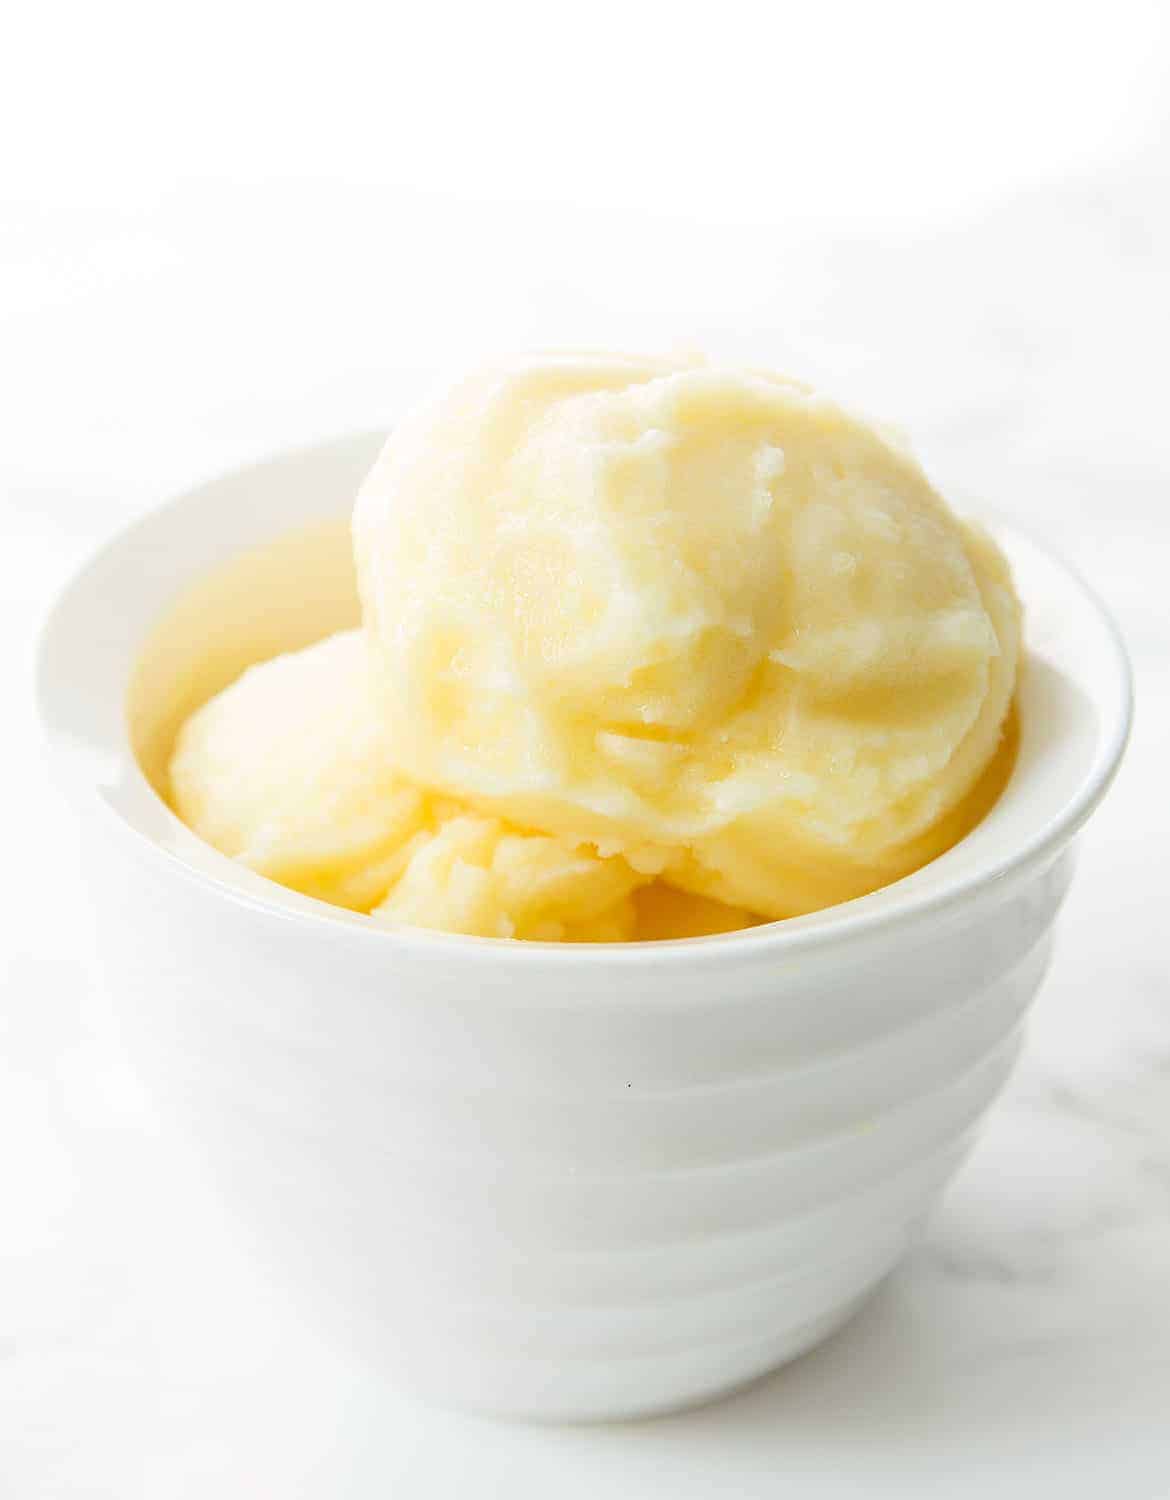 Pineapple sorbet in a white bowl over a white background.